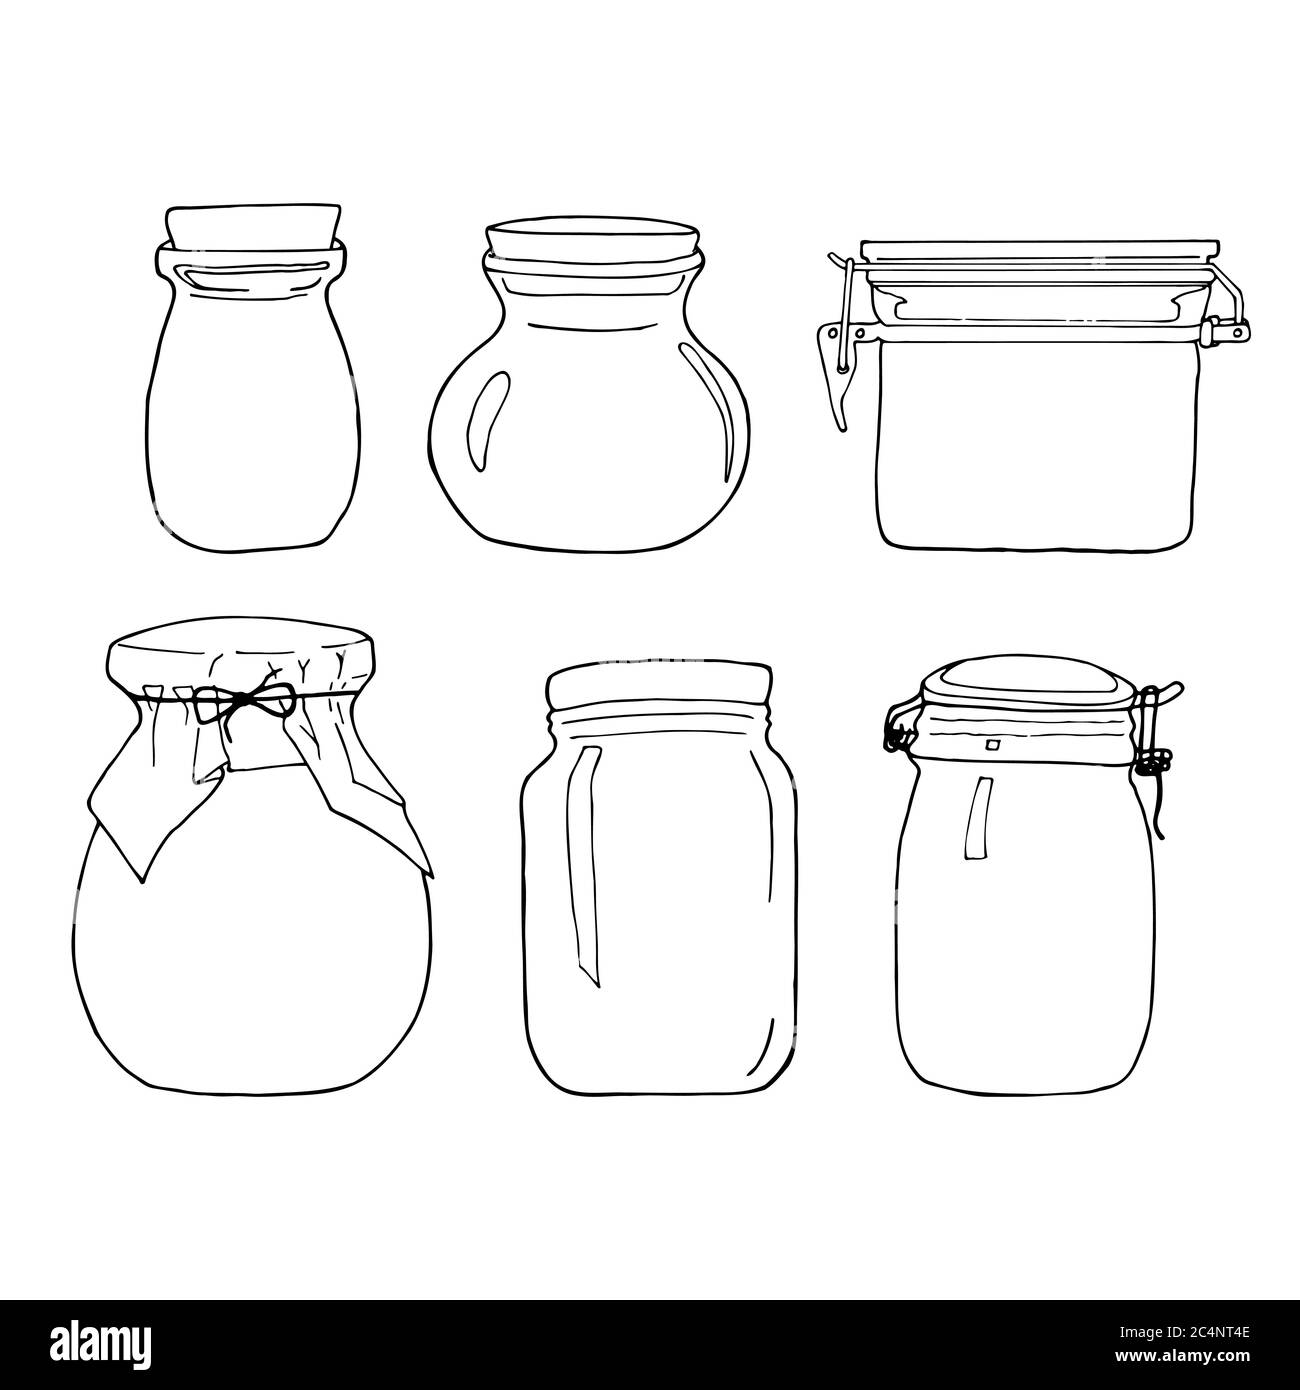 Hand drawn jar set. Contour sketch. Kitchen objects doodle style. Vector illustration isolated on white background. Alchemy and vintage. Stock Vector